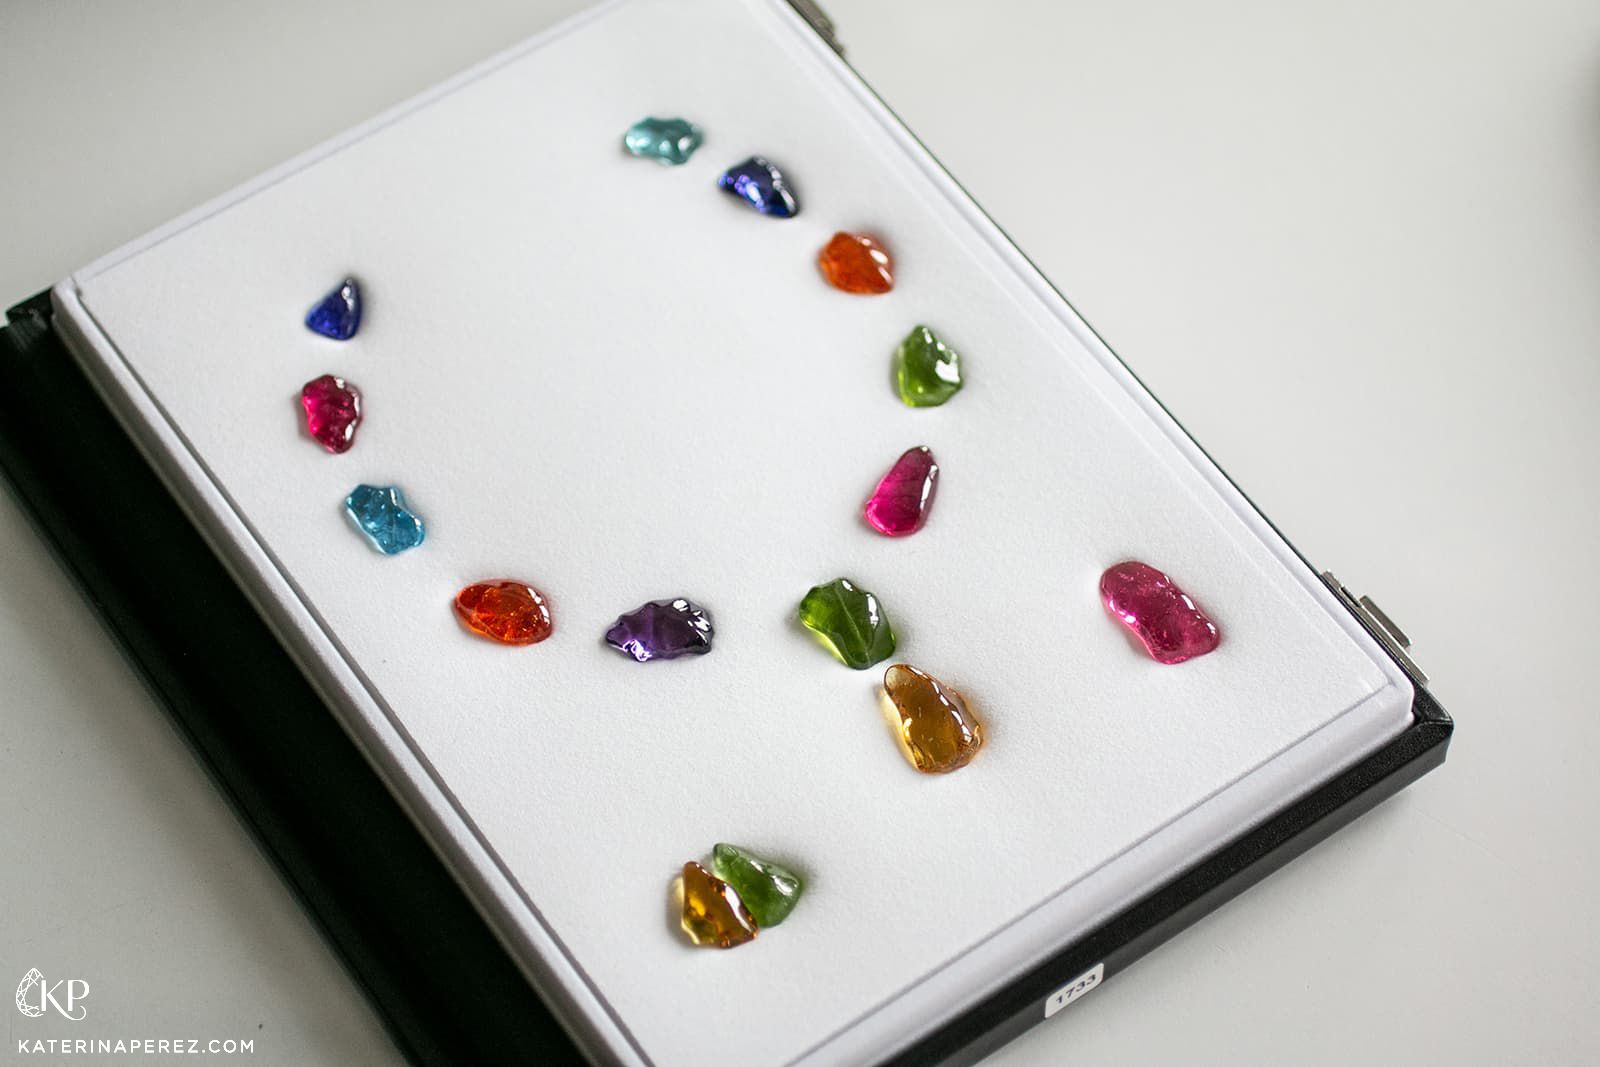 Baroque shaped coloured gemstones arranged in a necklace and asymmetric earring layout by Paul Wild, featuring tanzanite, aquamarine, yellow beryl, peridot, rubellite, amethyst and Mandarin garnet 